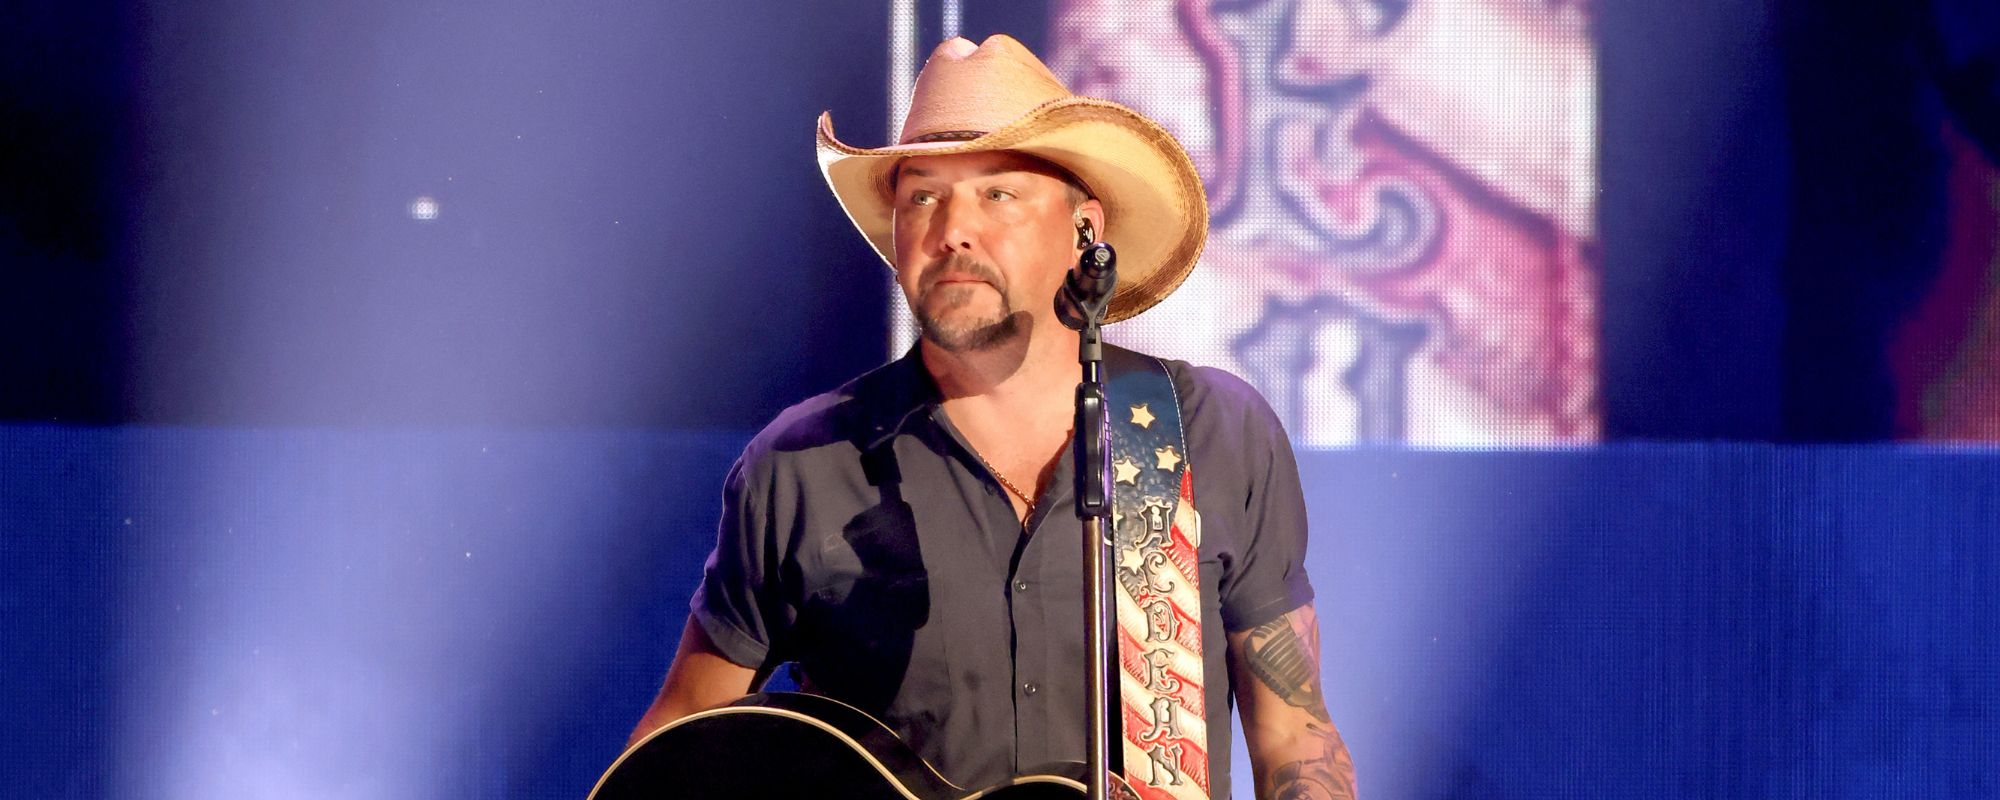 Jason Aldean Honors Toby Keith With Heartbreaking “Should’ve Been a Cowboy” ACM Awards Tribute Performance [Video]